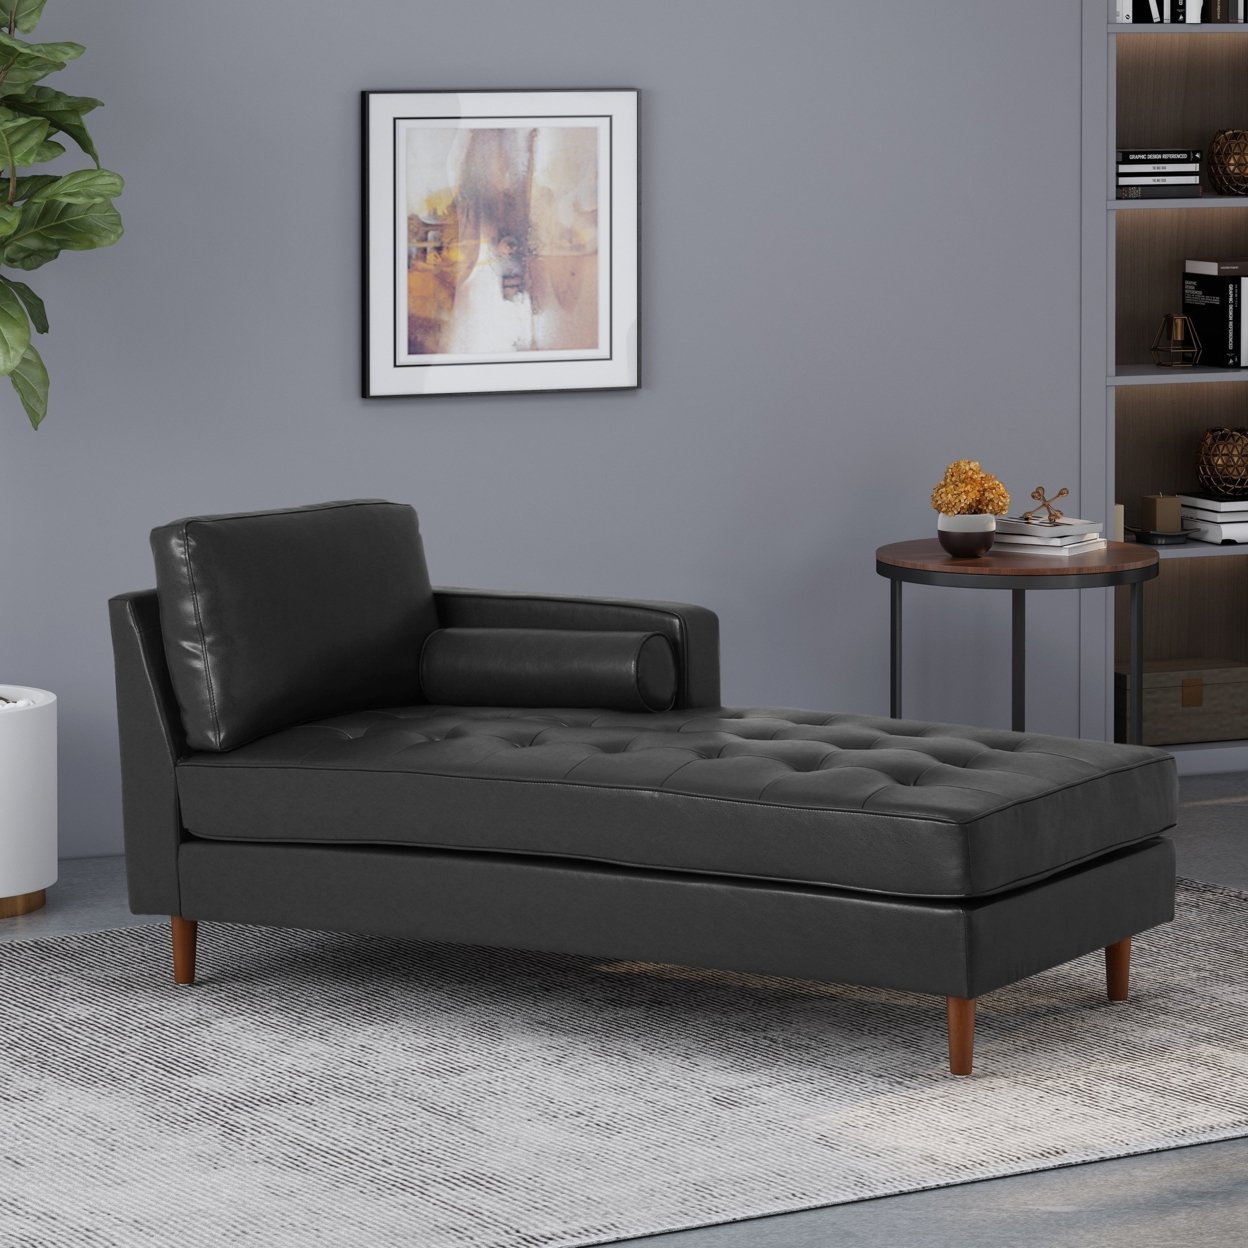 Hixon Contemporary Tufted Upholstered Chaise Lounge - Espresso/midnight